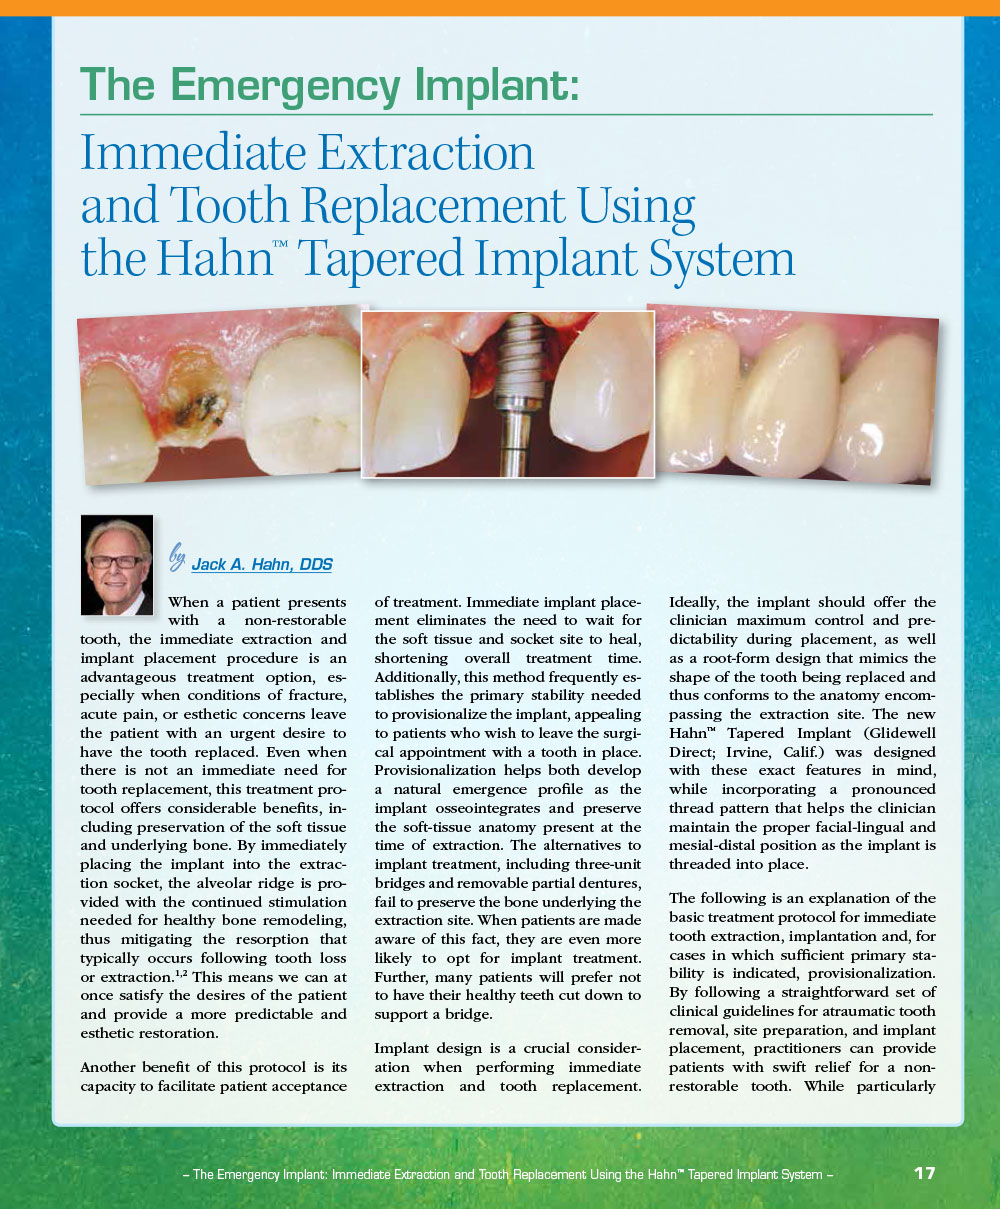 The Emergency Implant: Immediate Extraction and Tooth Replacement Using the Hahn™ Tapered Implant System